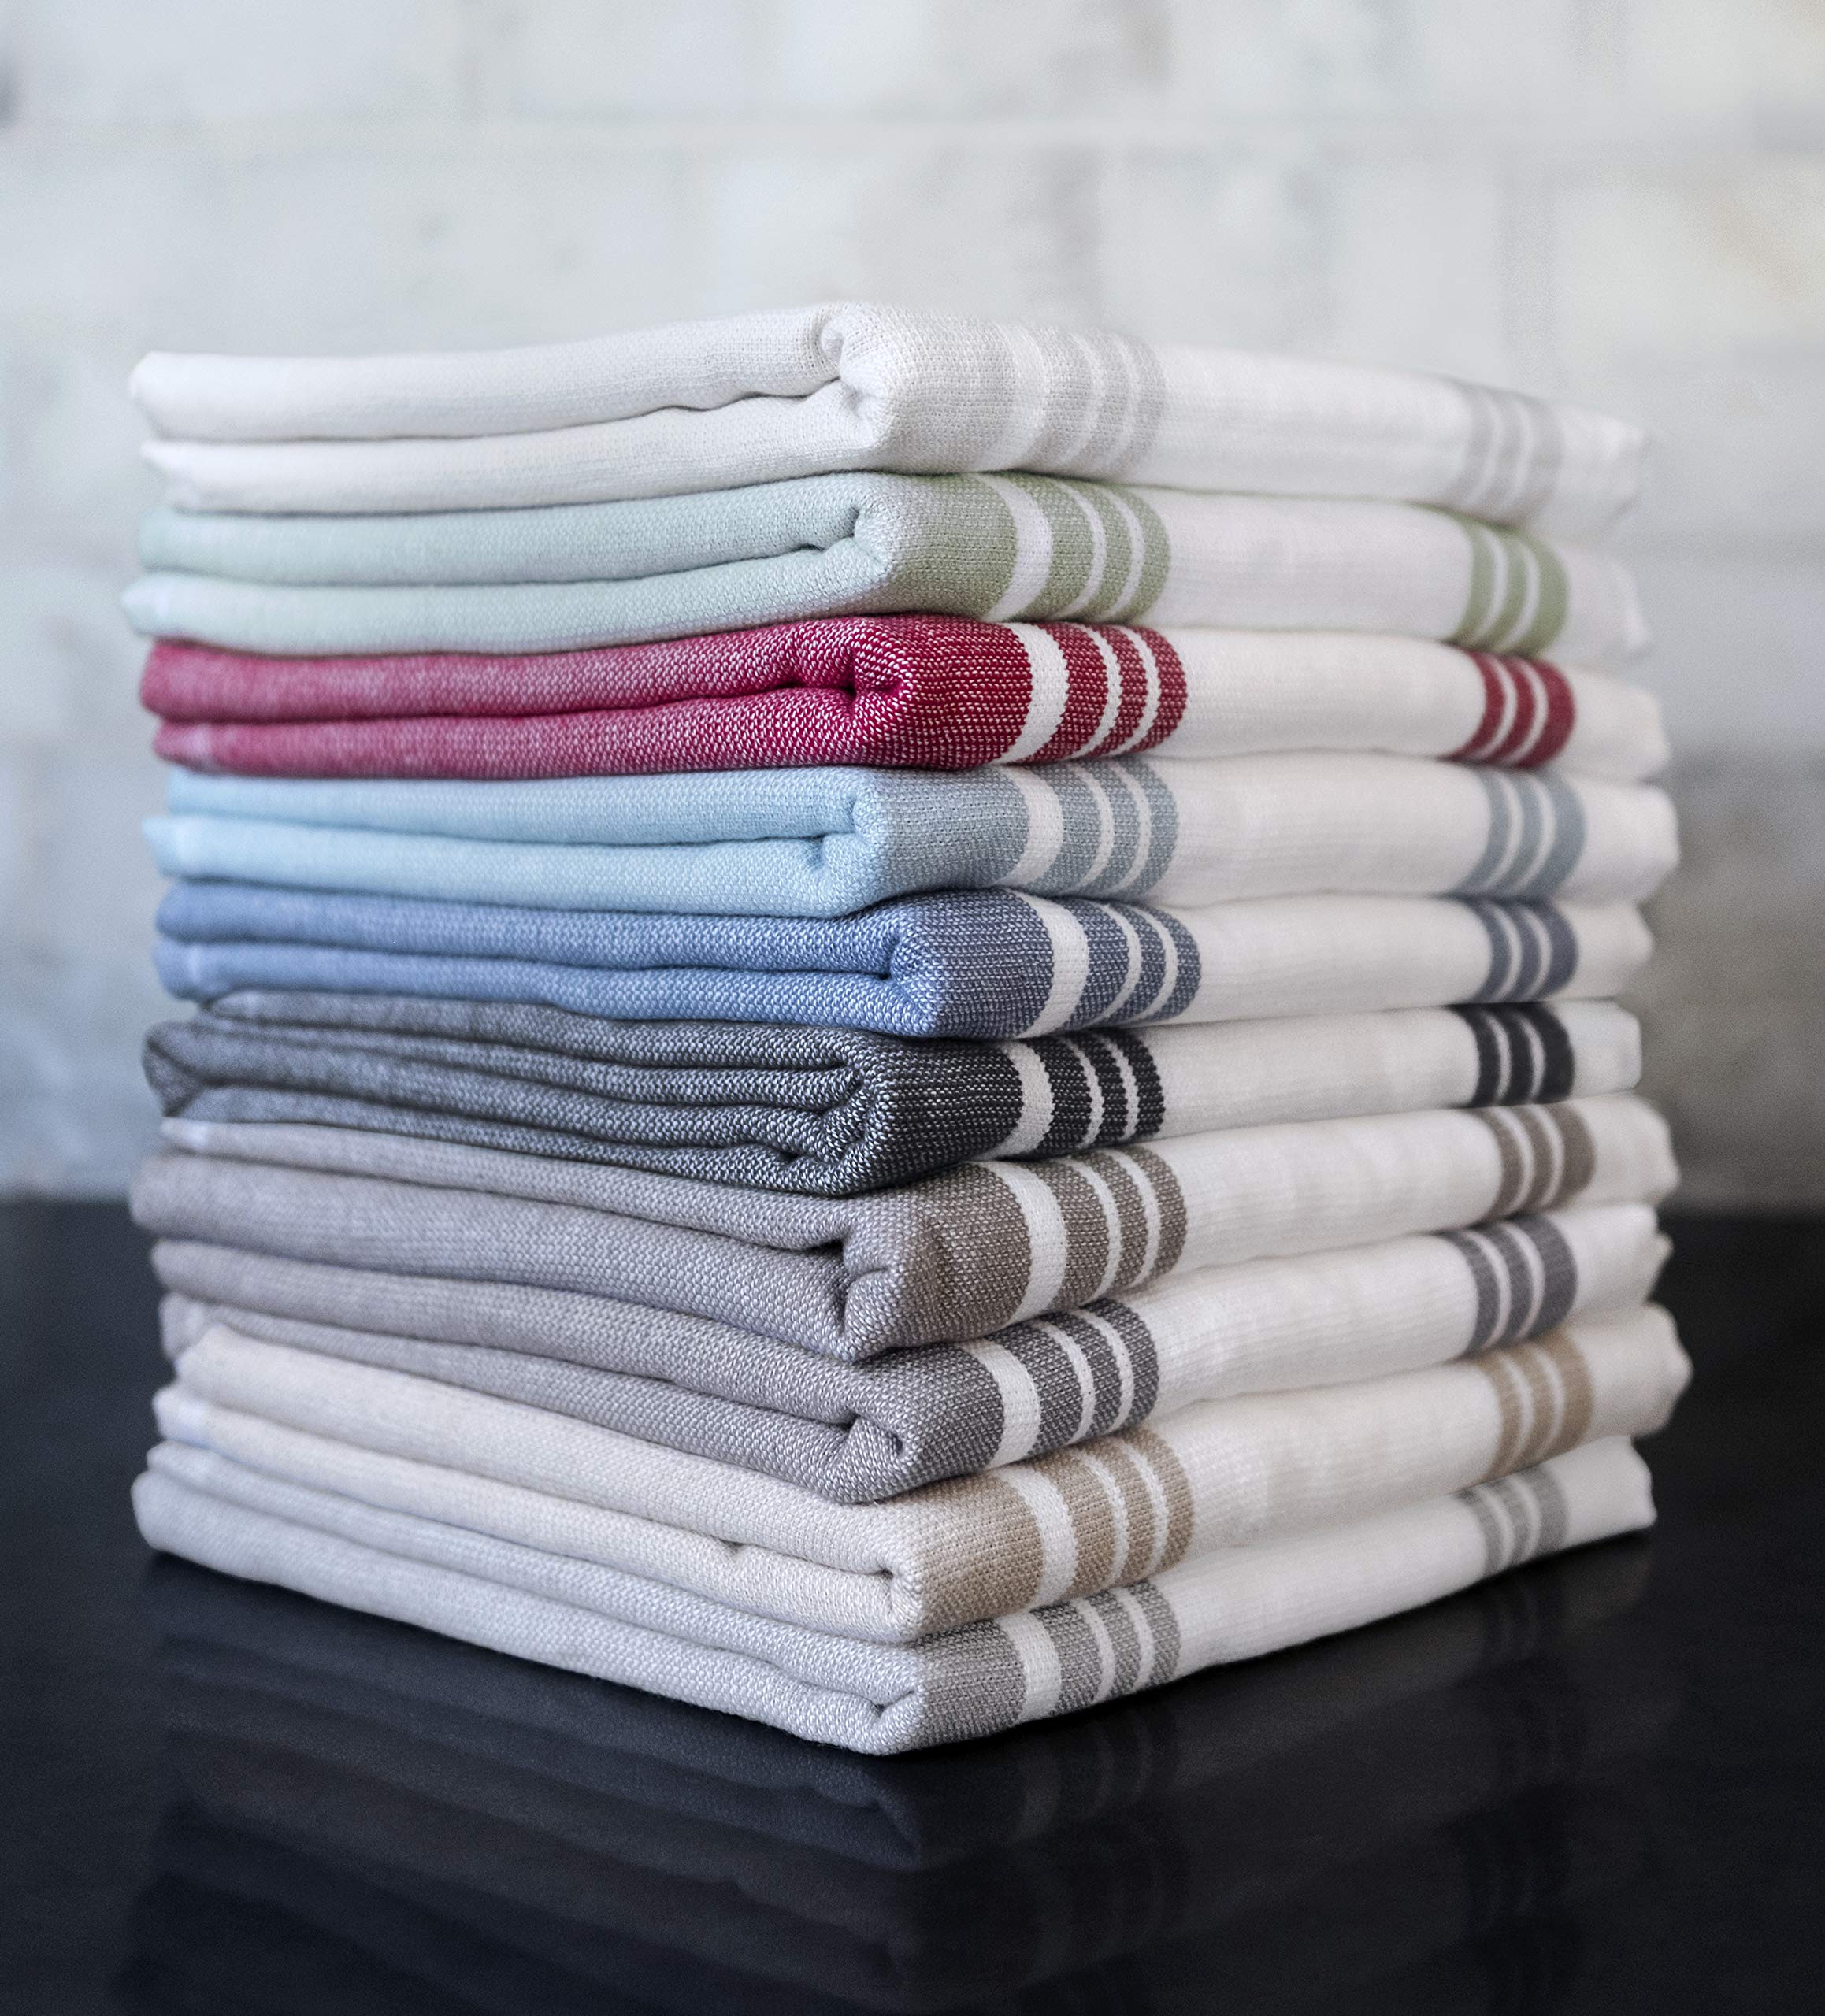 Dish Towels Dual Purpose Reversible, 100% Absorbent Cotton, Kitchen Towels Set of 3 Striped, 17